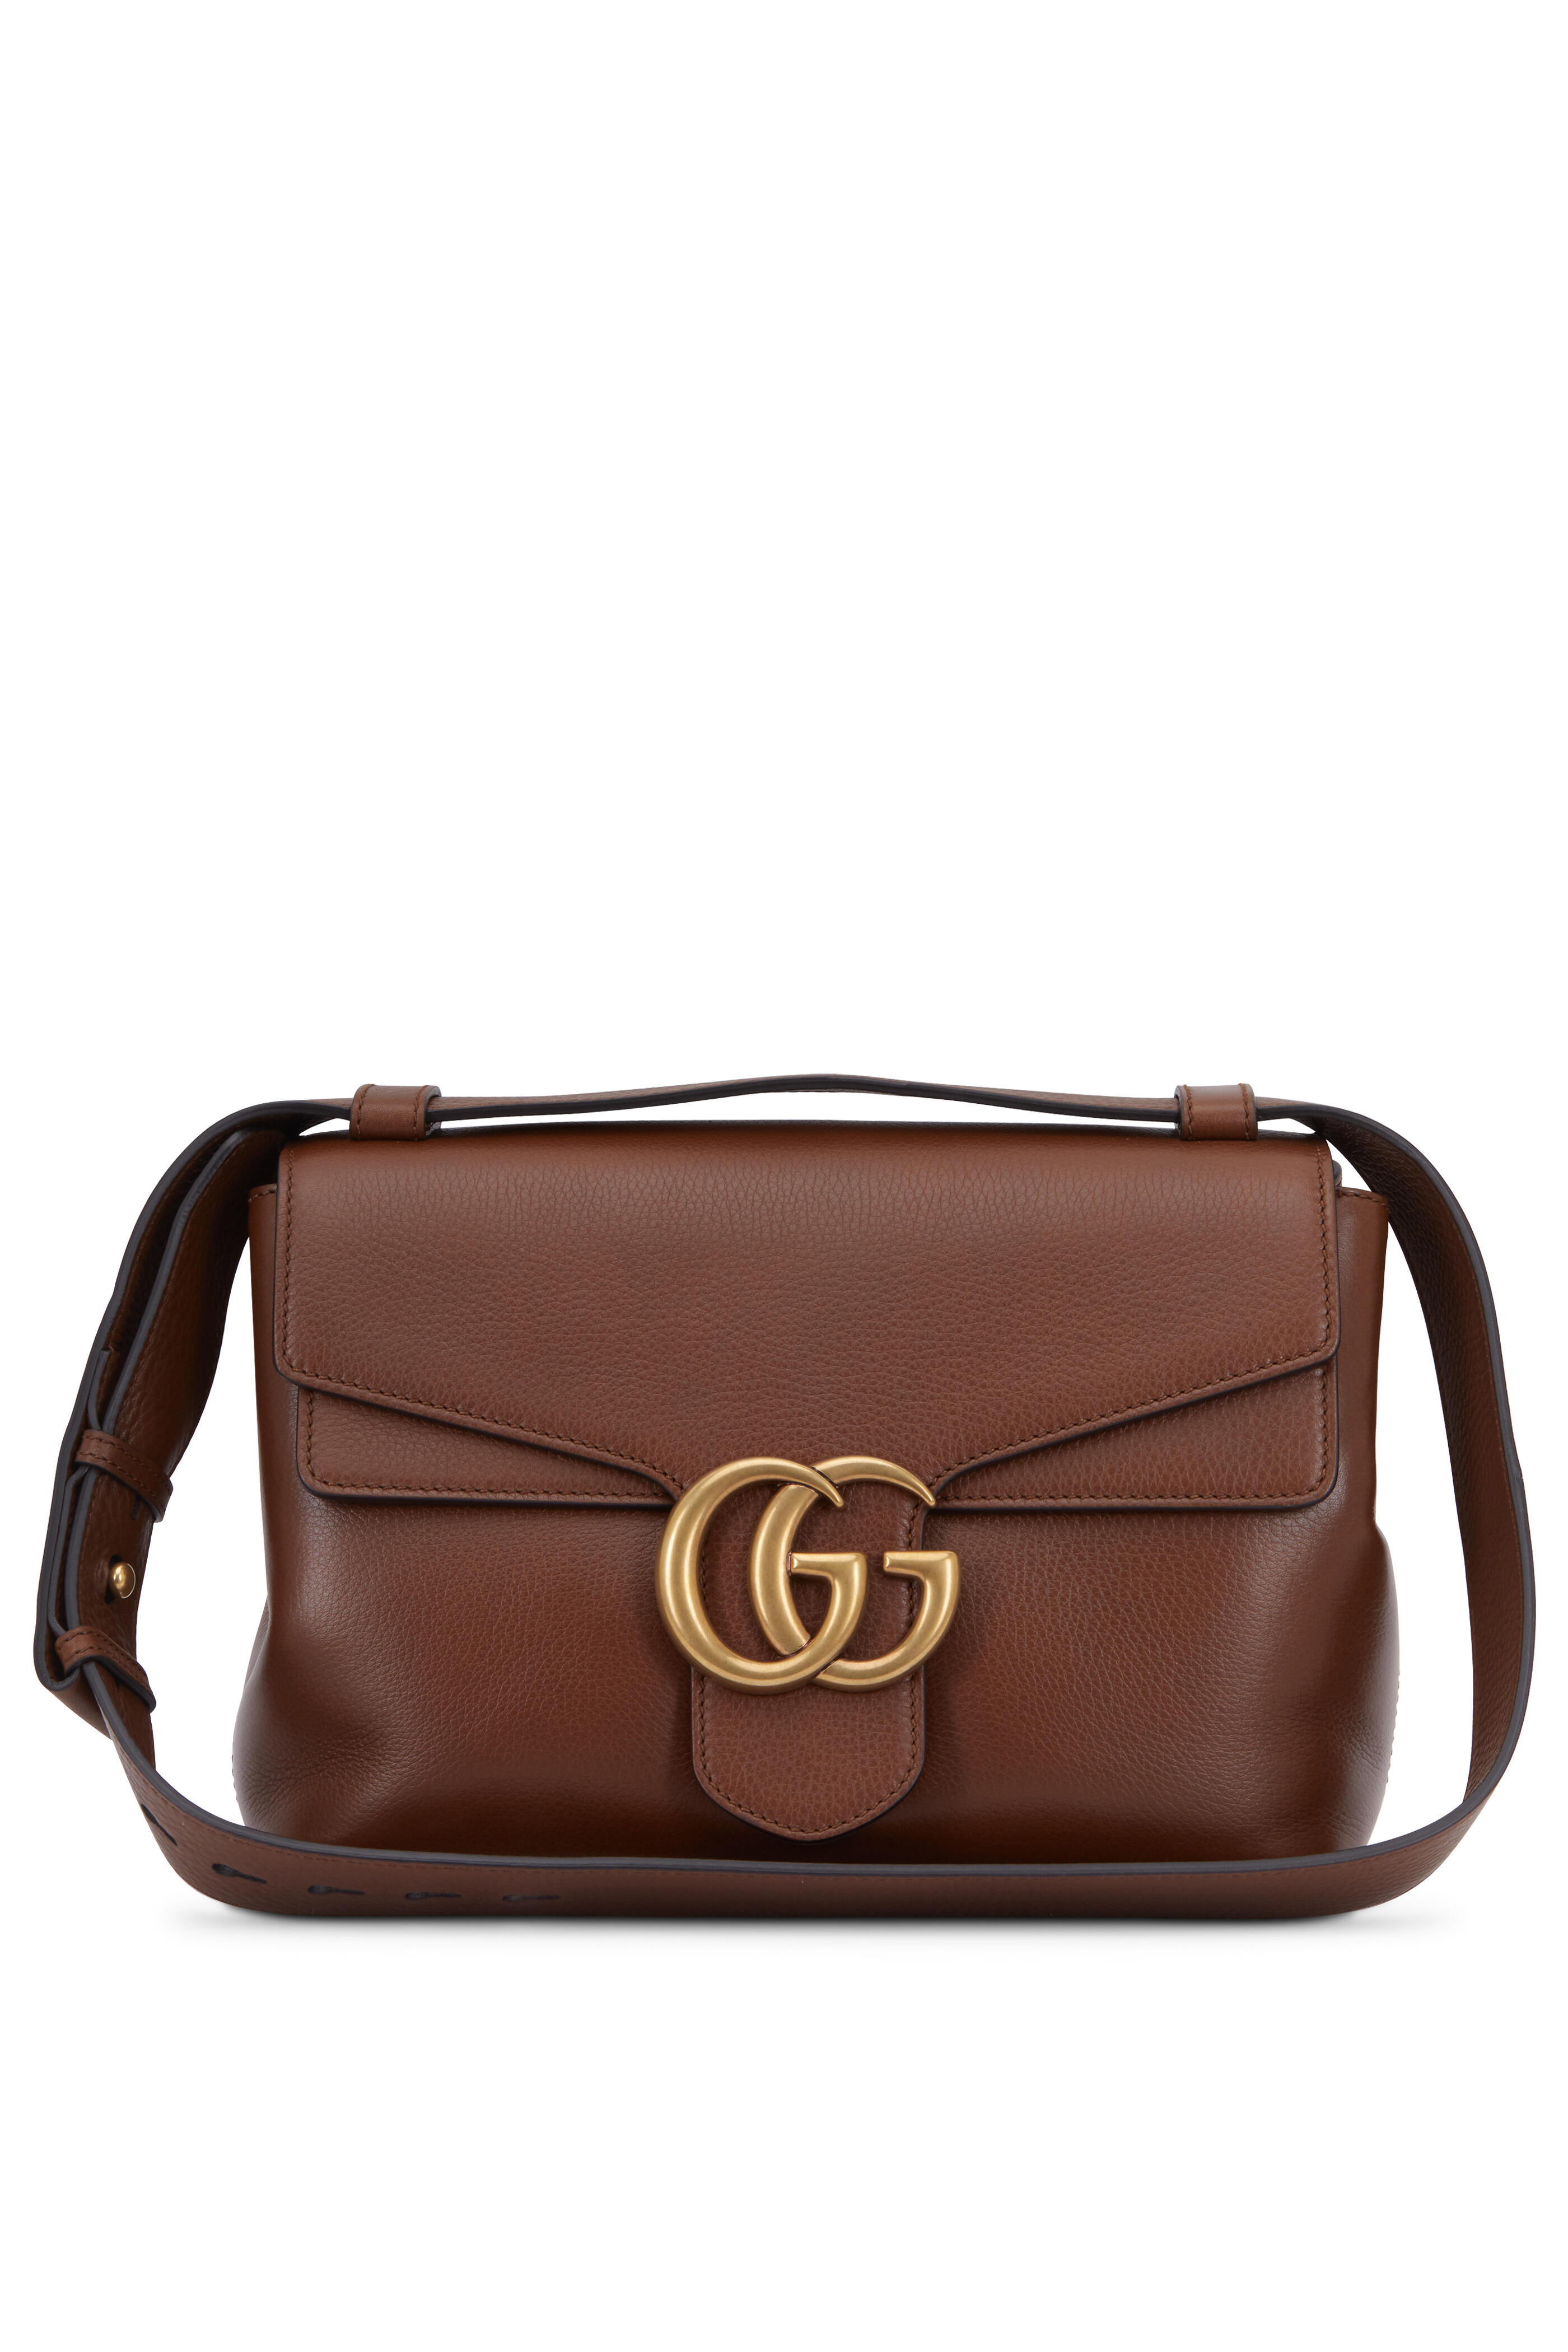 Gucci - GG Marmont Leather Flap Small Shoulder Bag